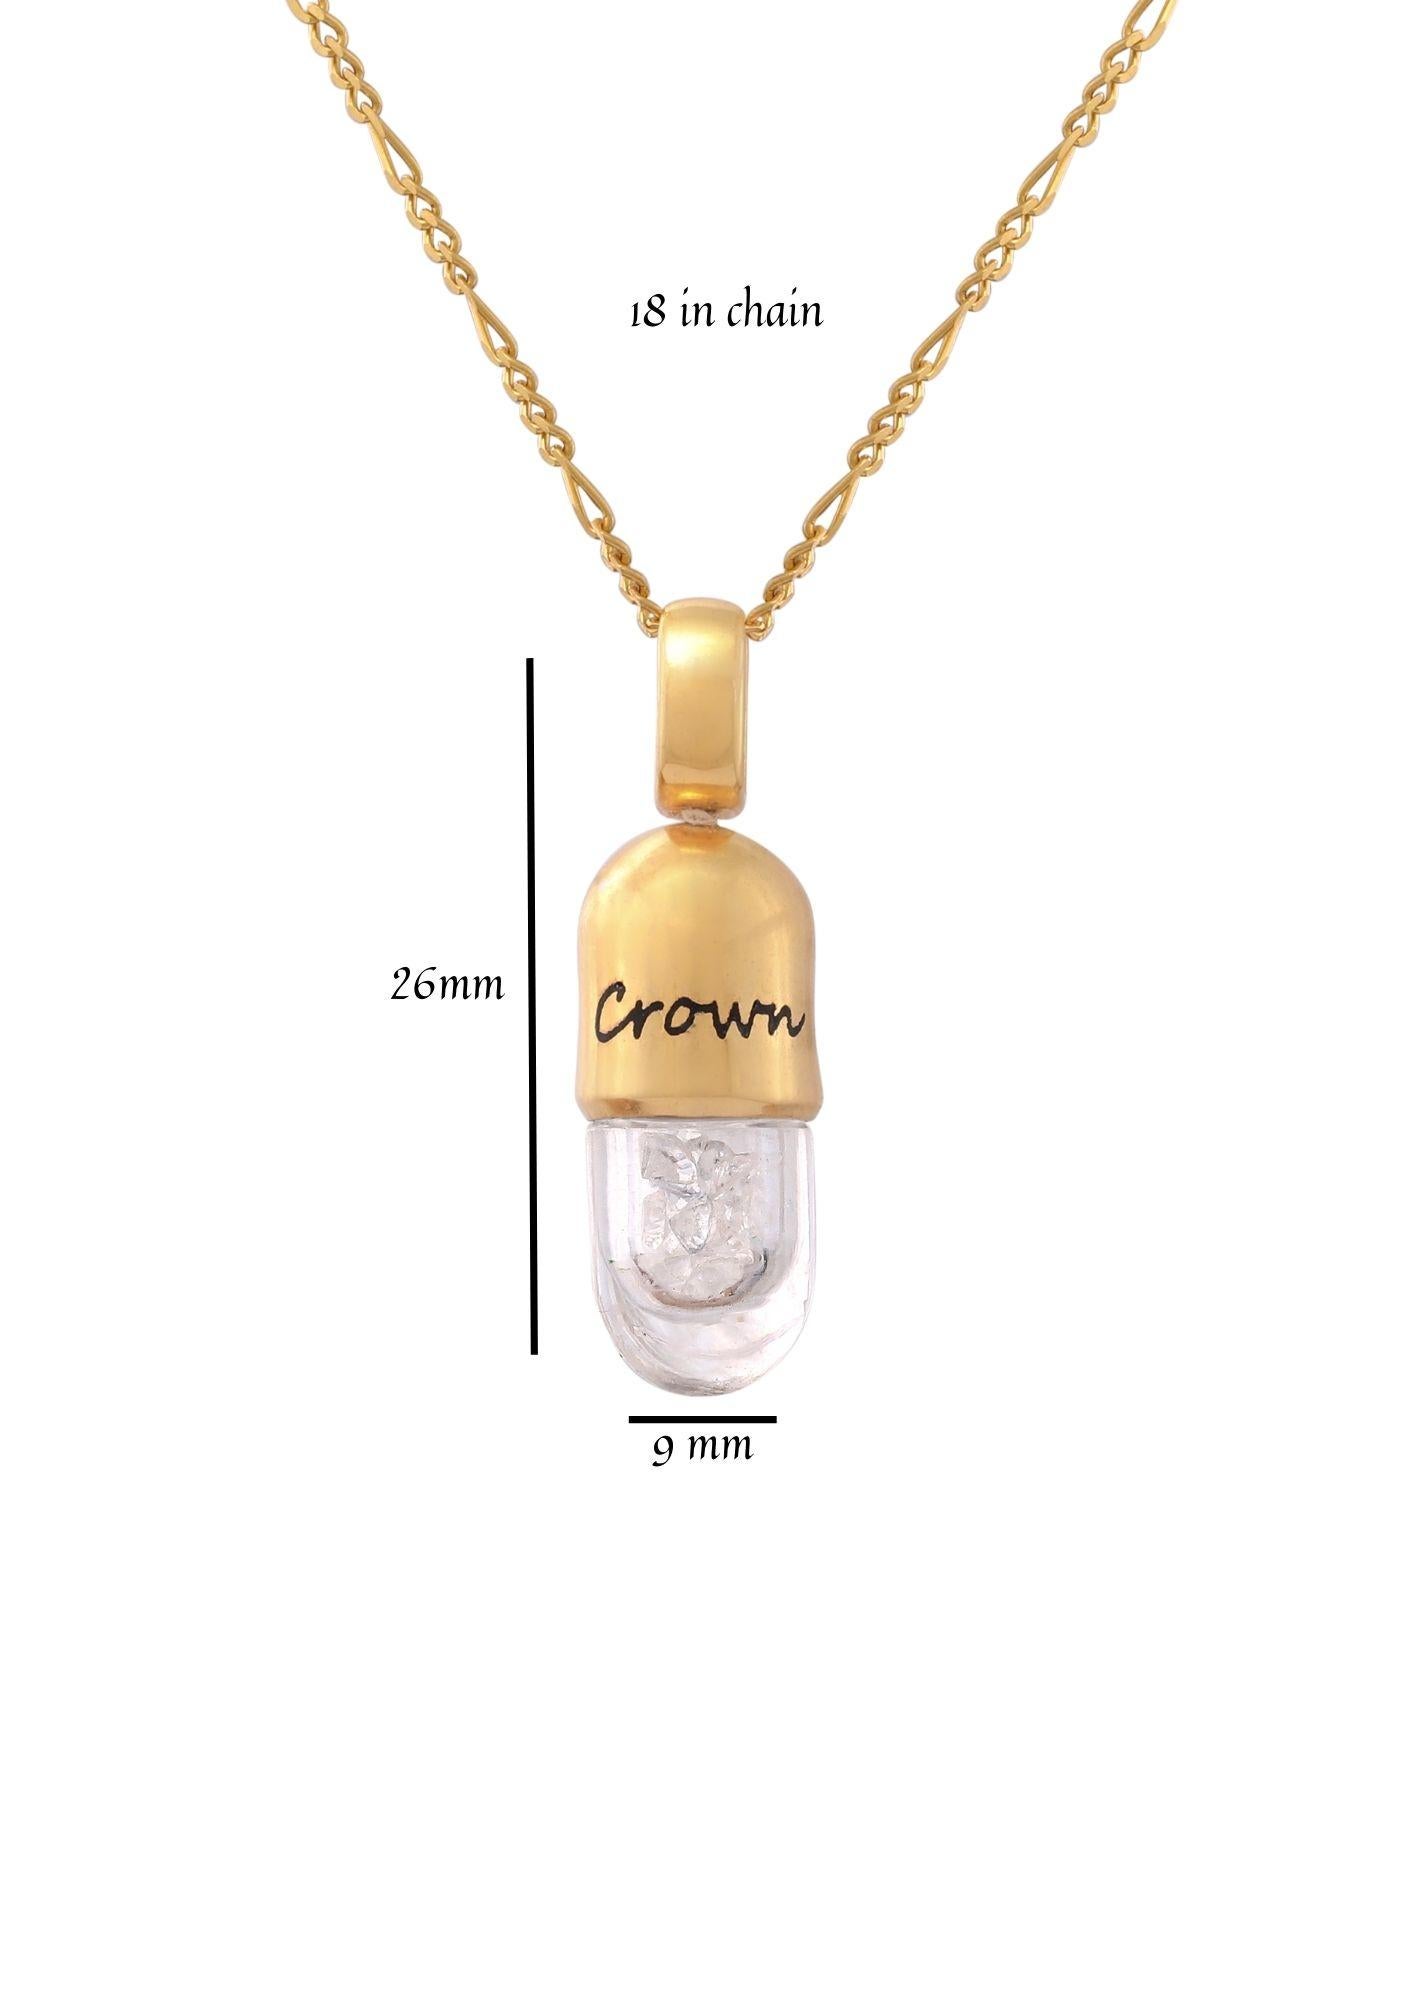 The Seventh Chakra or the Crown Chakra is at located at the top of the head associated with Higher Consciousness, Spirituality and Enlightenment. The Crown Chakra is associated with Color White. 

Each Crown Chakra Pendant is handcrafted in Sterling